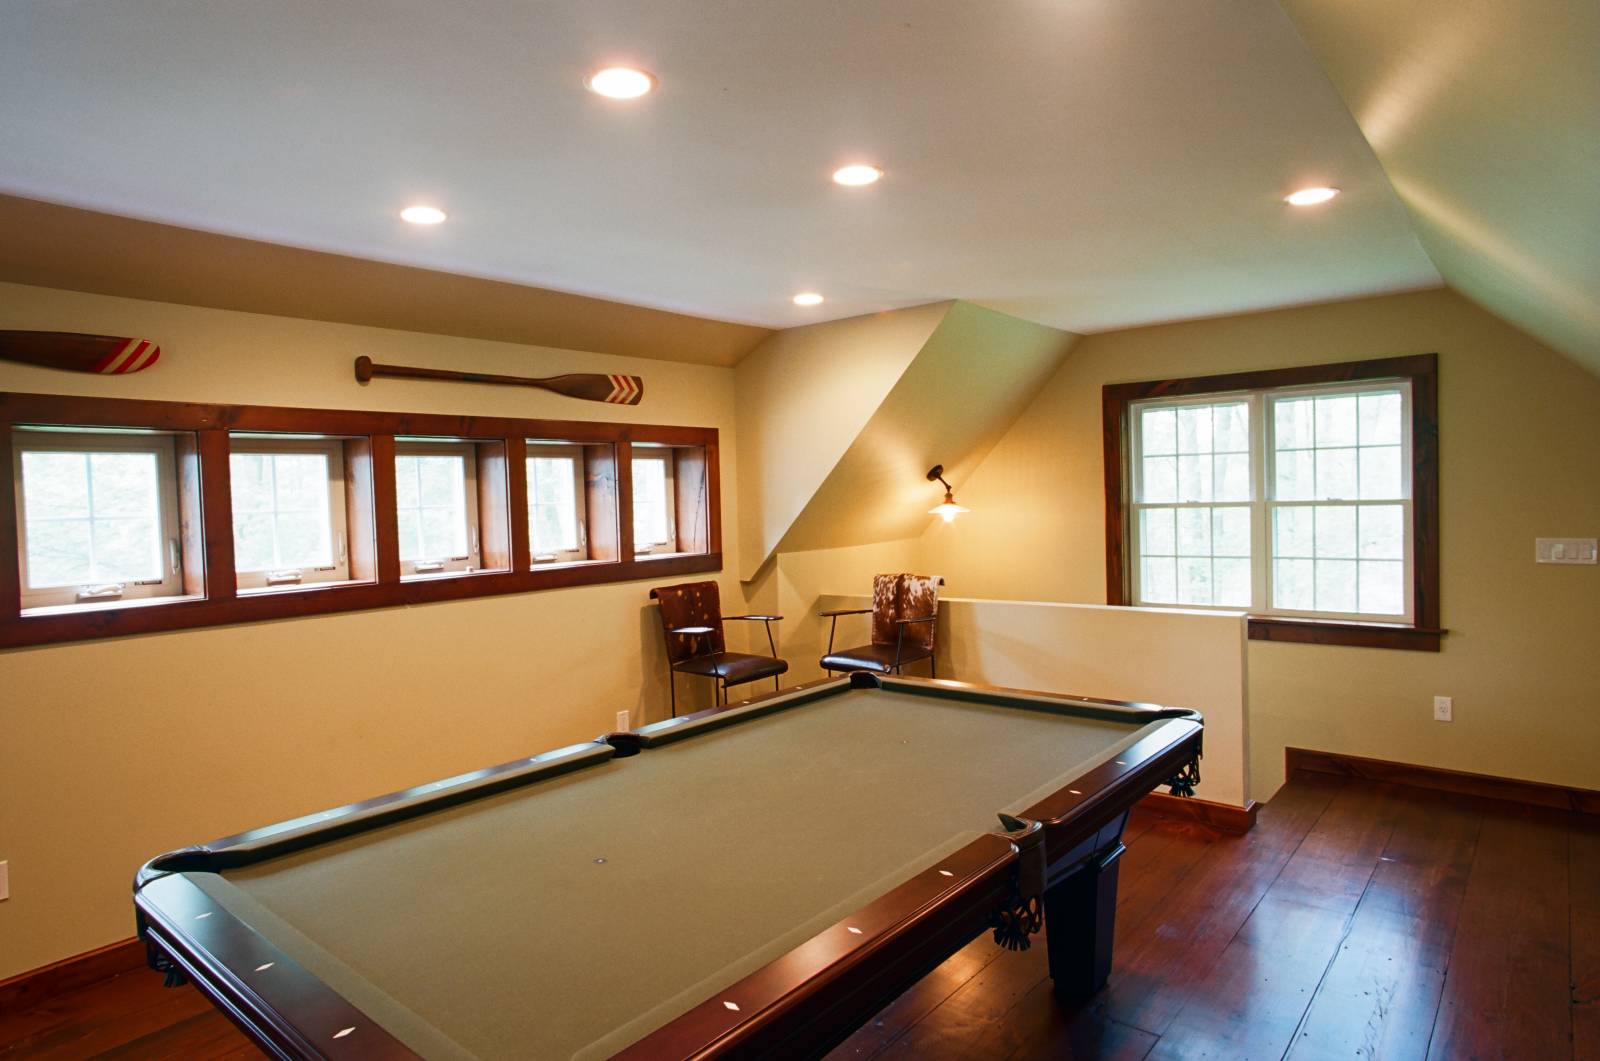 Another look at the transom dormer and pool table